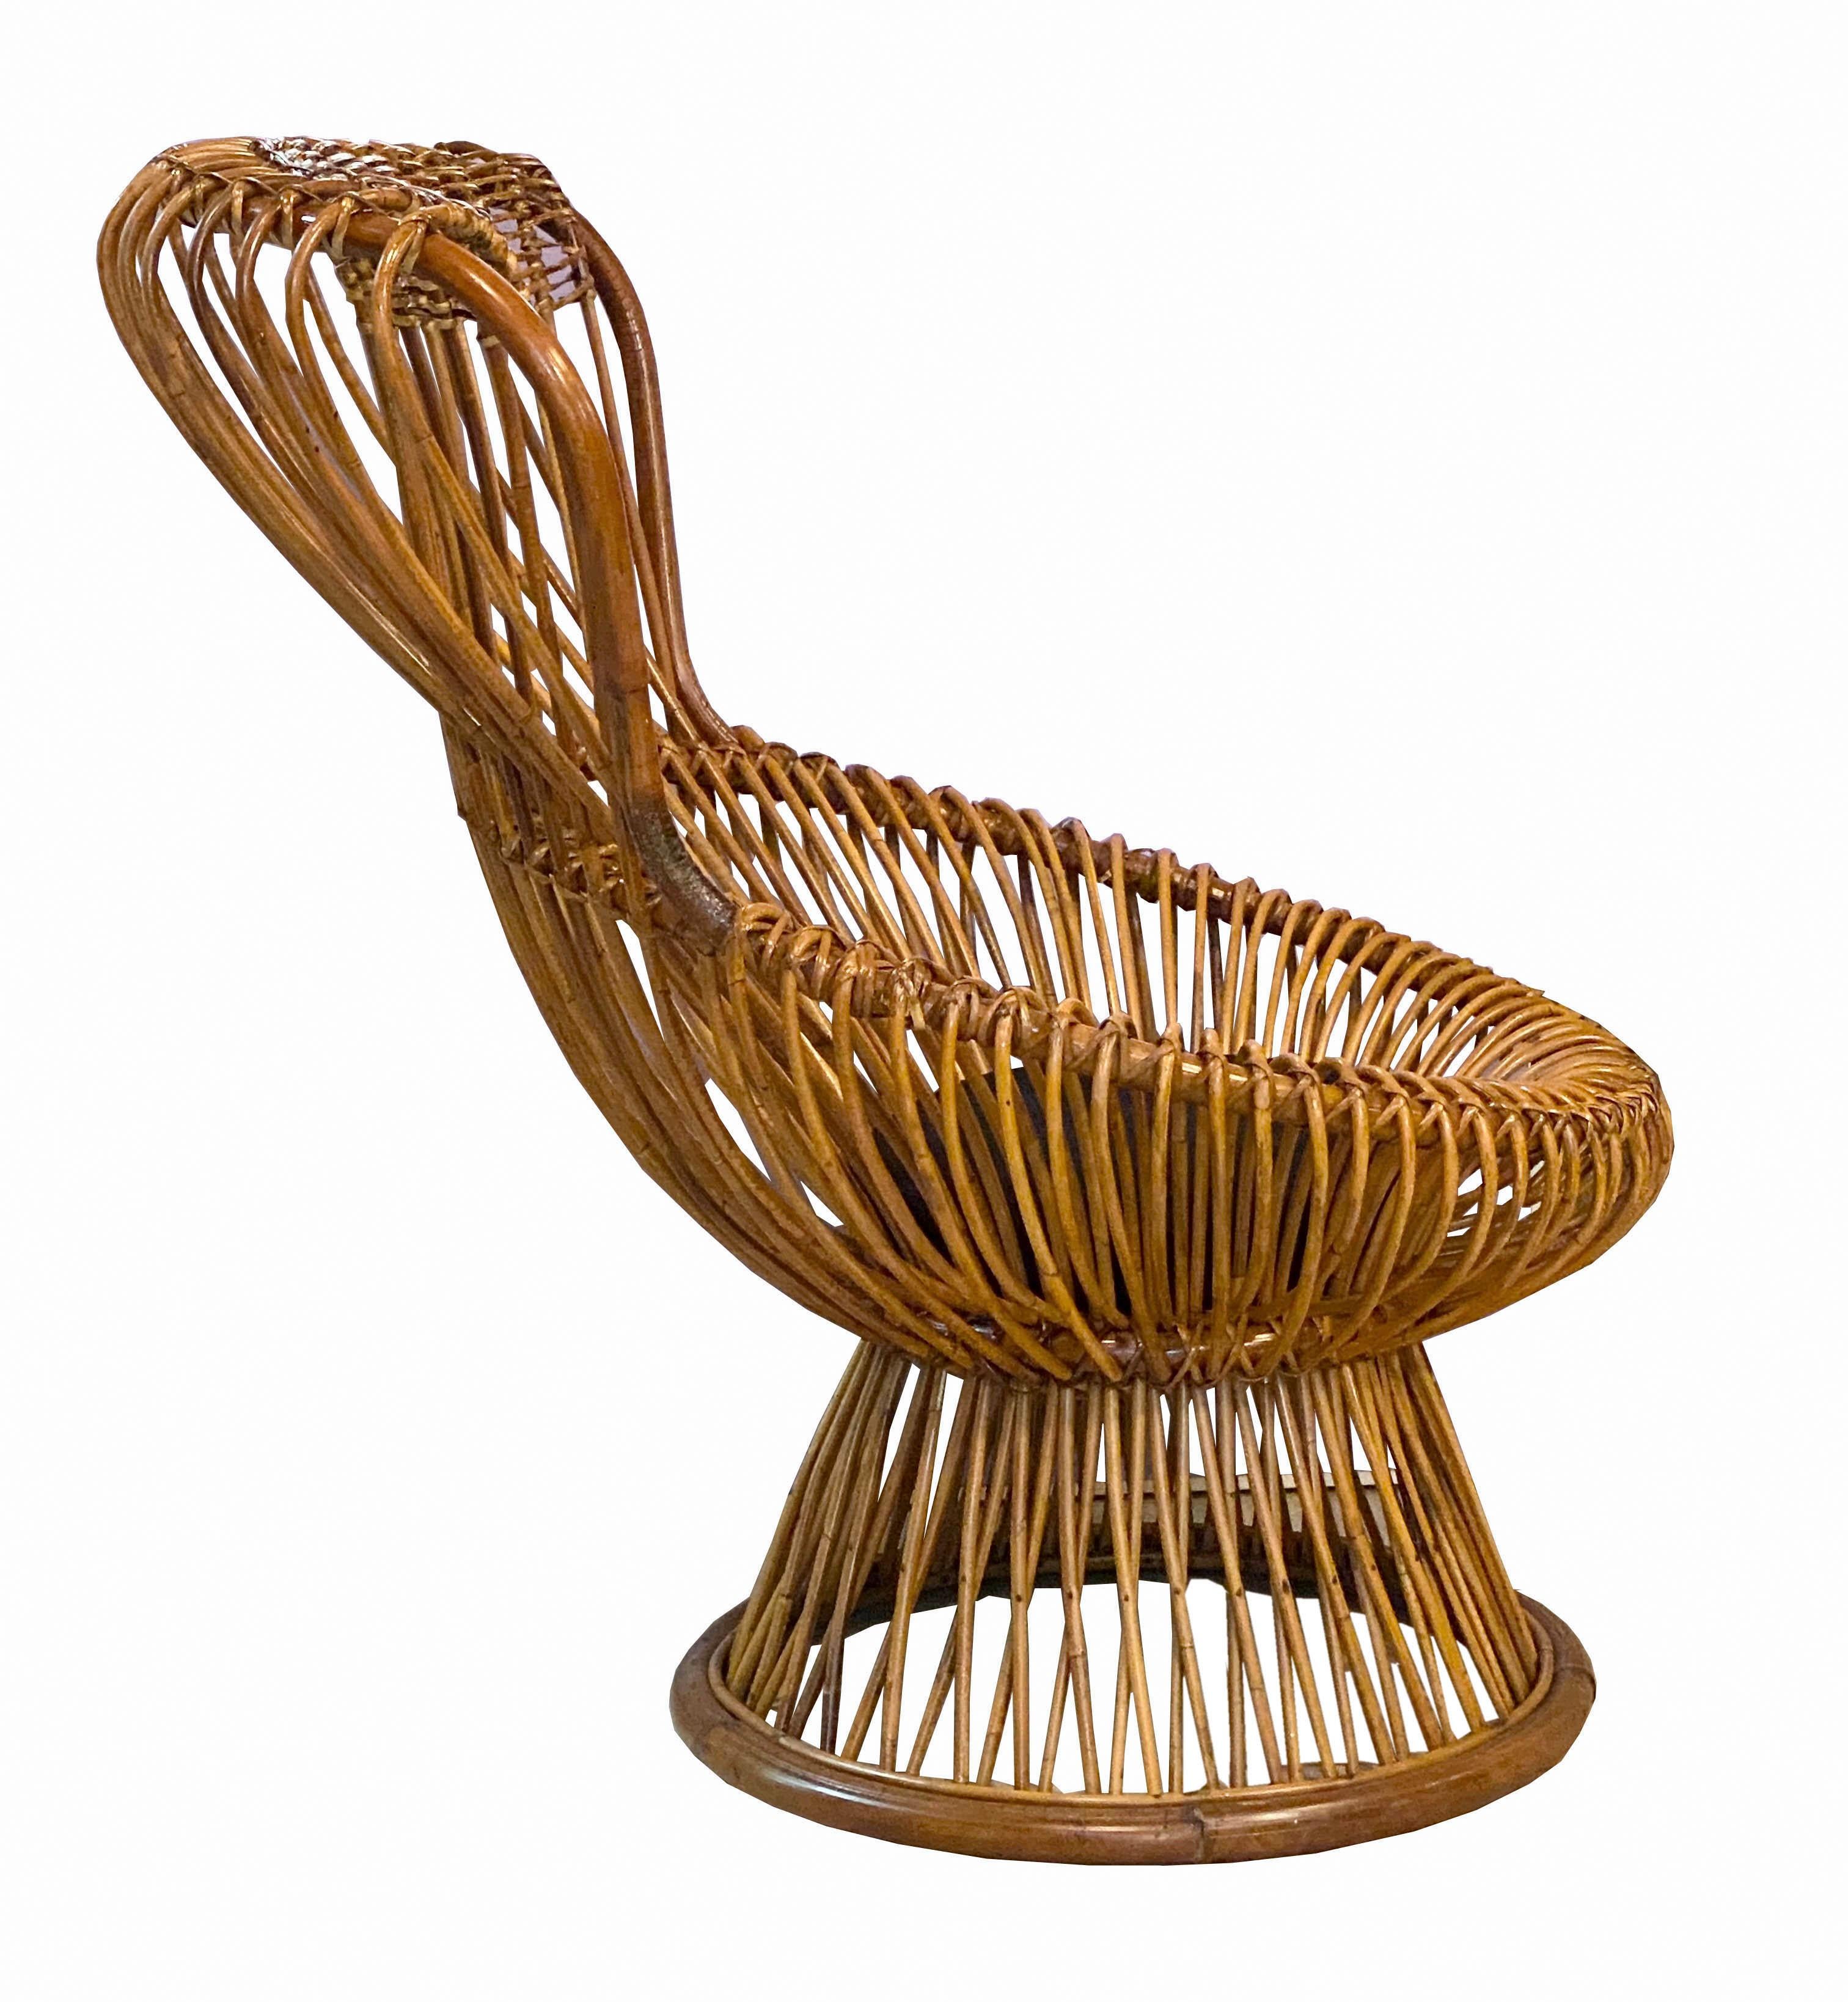 Just after the war, Albini experimented with the use of simple and low-cost materials such as wicker and wicker, thin and elastic. Margherita is the first legless armchair of Italian design.
Margherita is made with a structure composed of 60 reeds